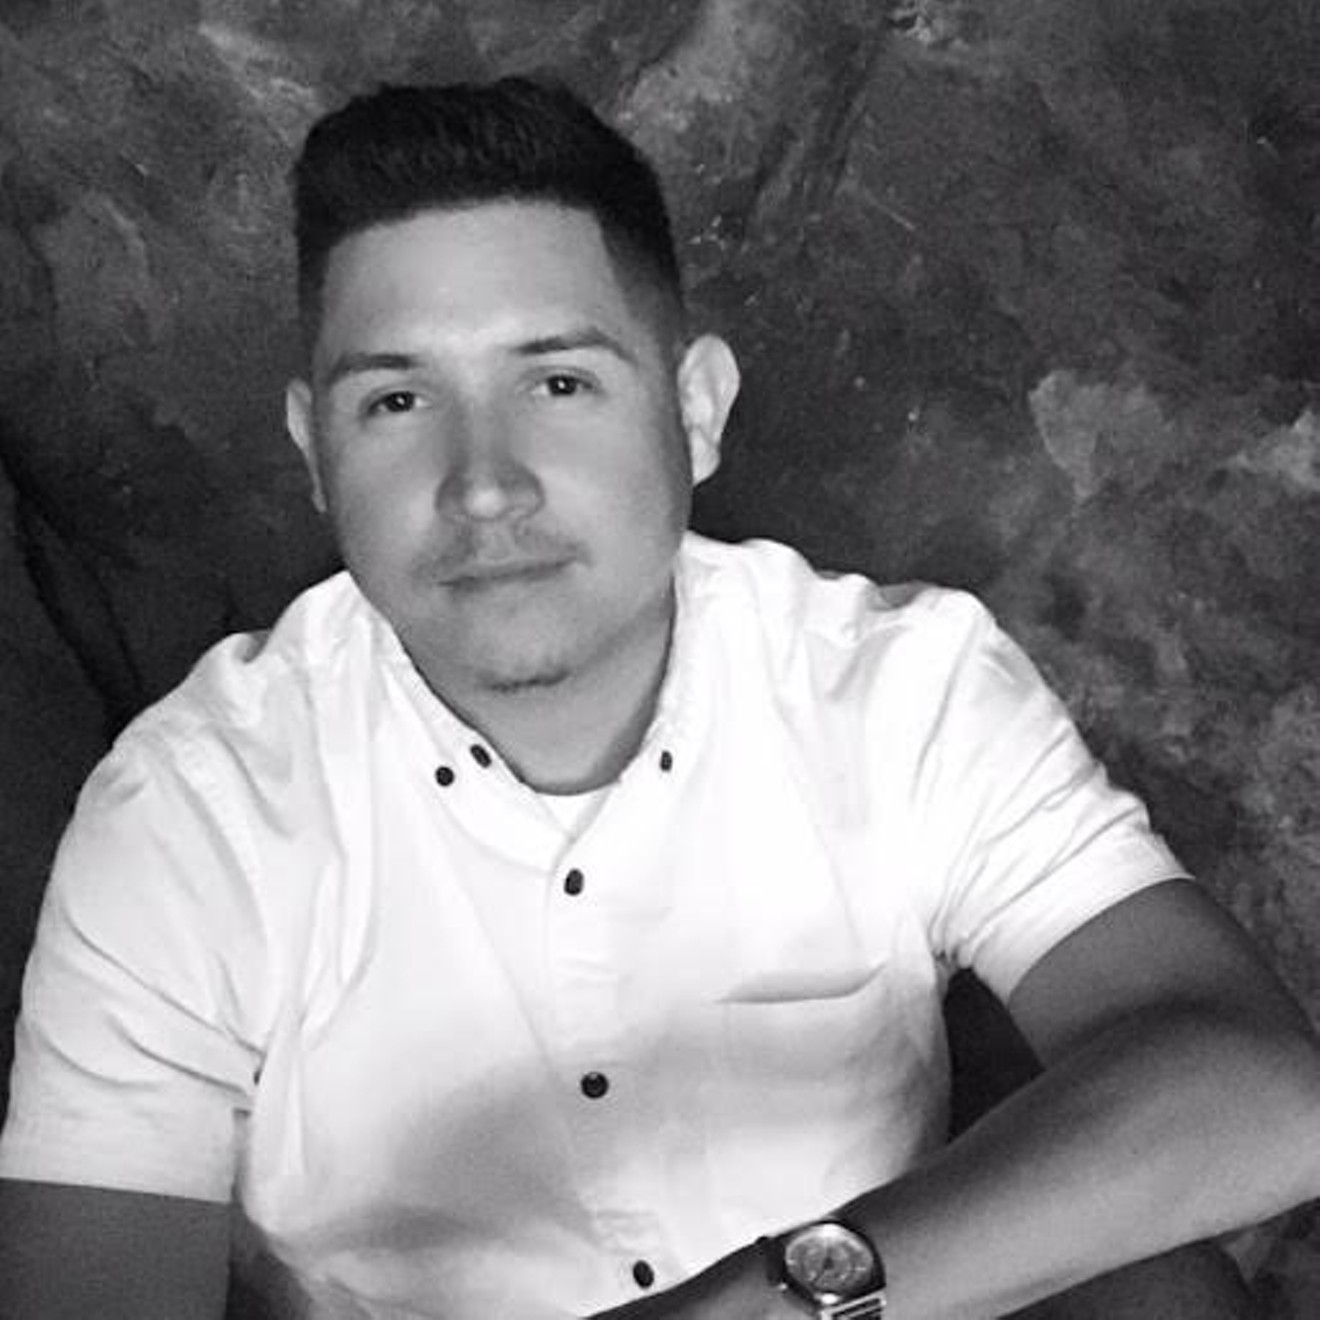 LaLo Montoya is one of 18,000 DREAMers in Colorado who face an uphill battle with President Trump.